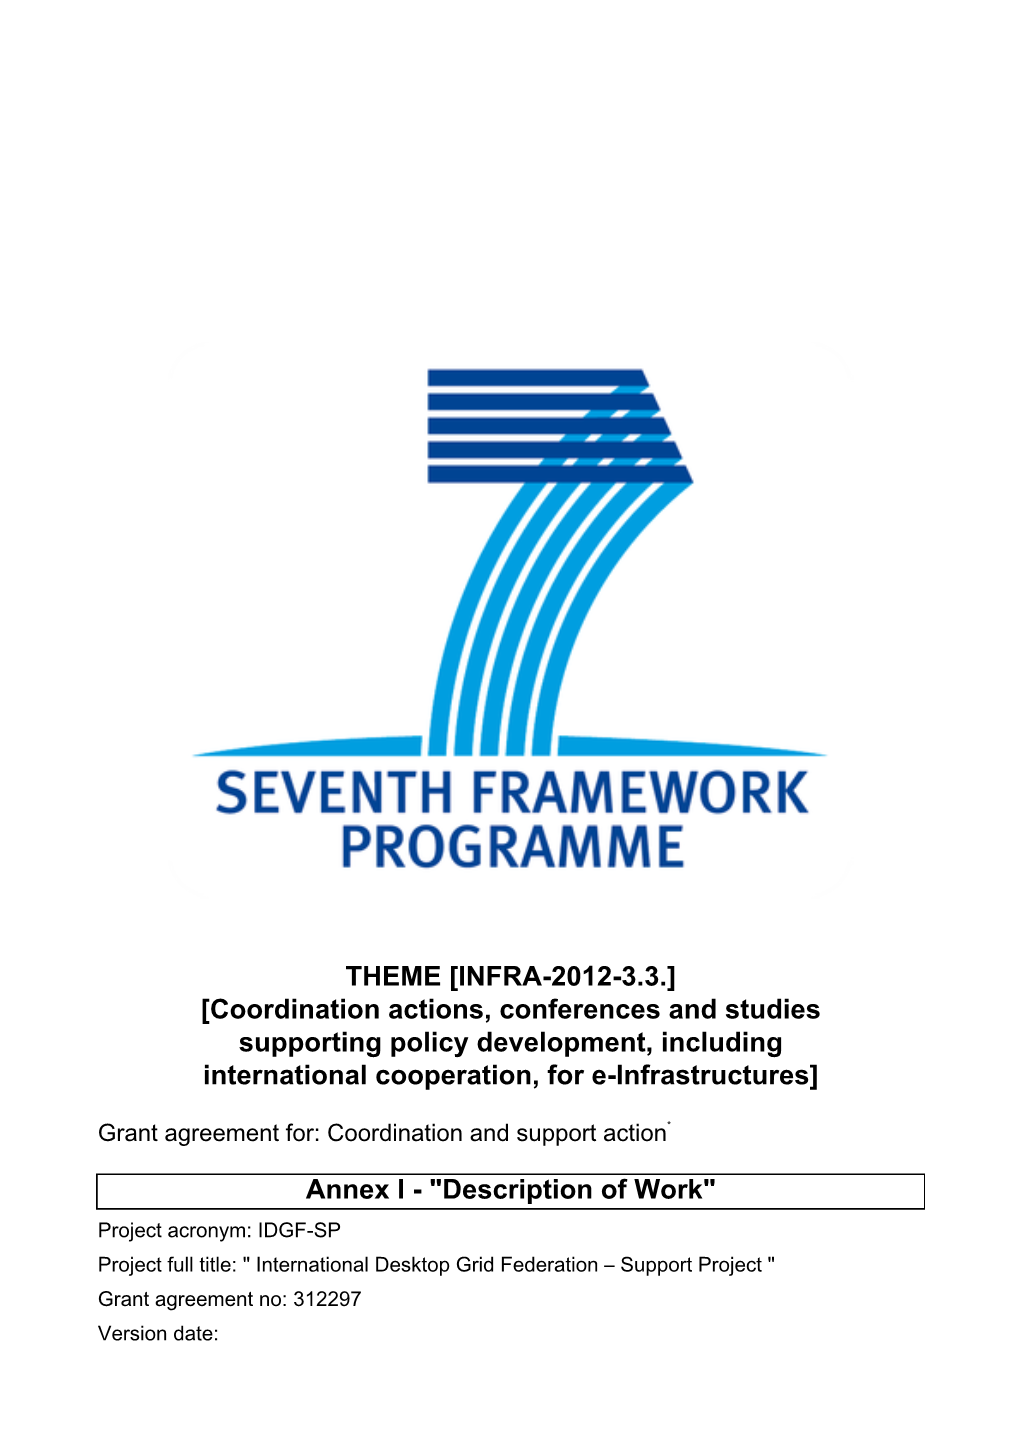 THEME [INFRA-2012-3.3.] [Coordination Actions, Conferences and Studies Supporting Policy Development, Including International Cooperation, for E-Infrastructures]